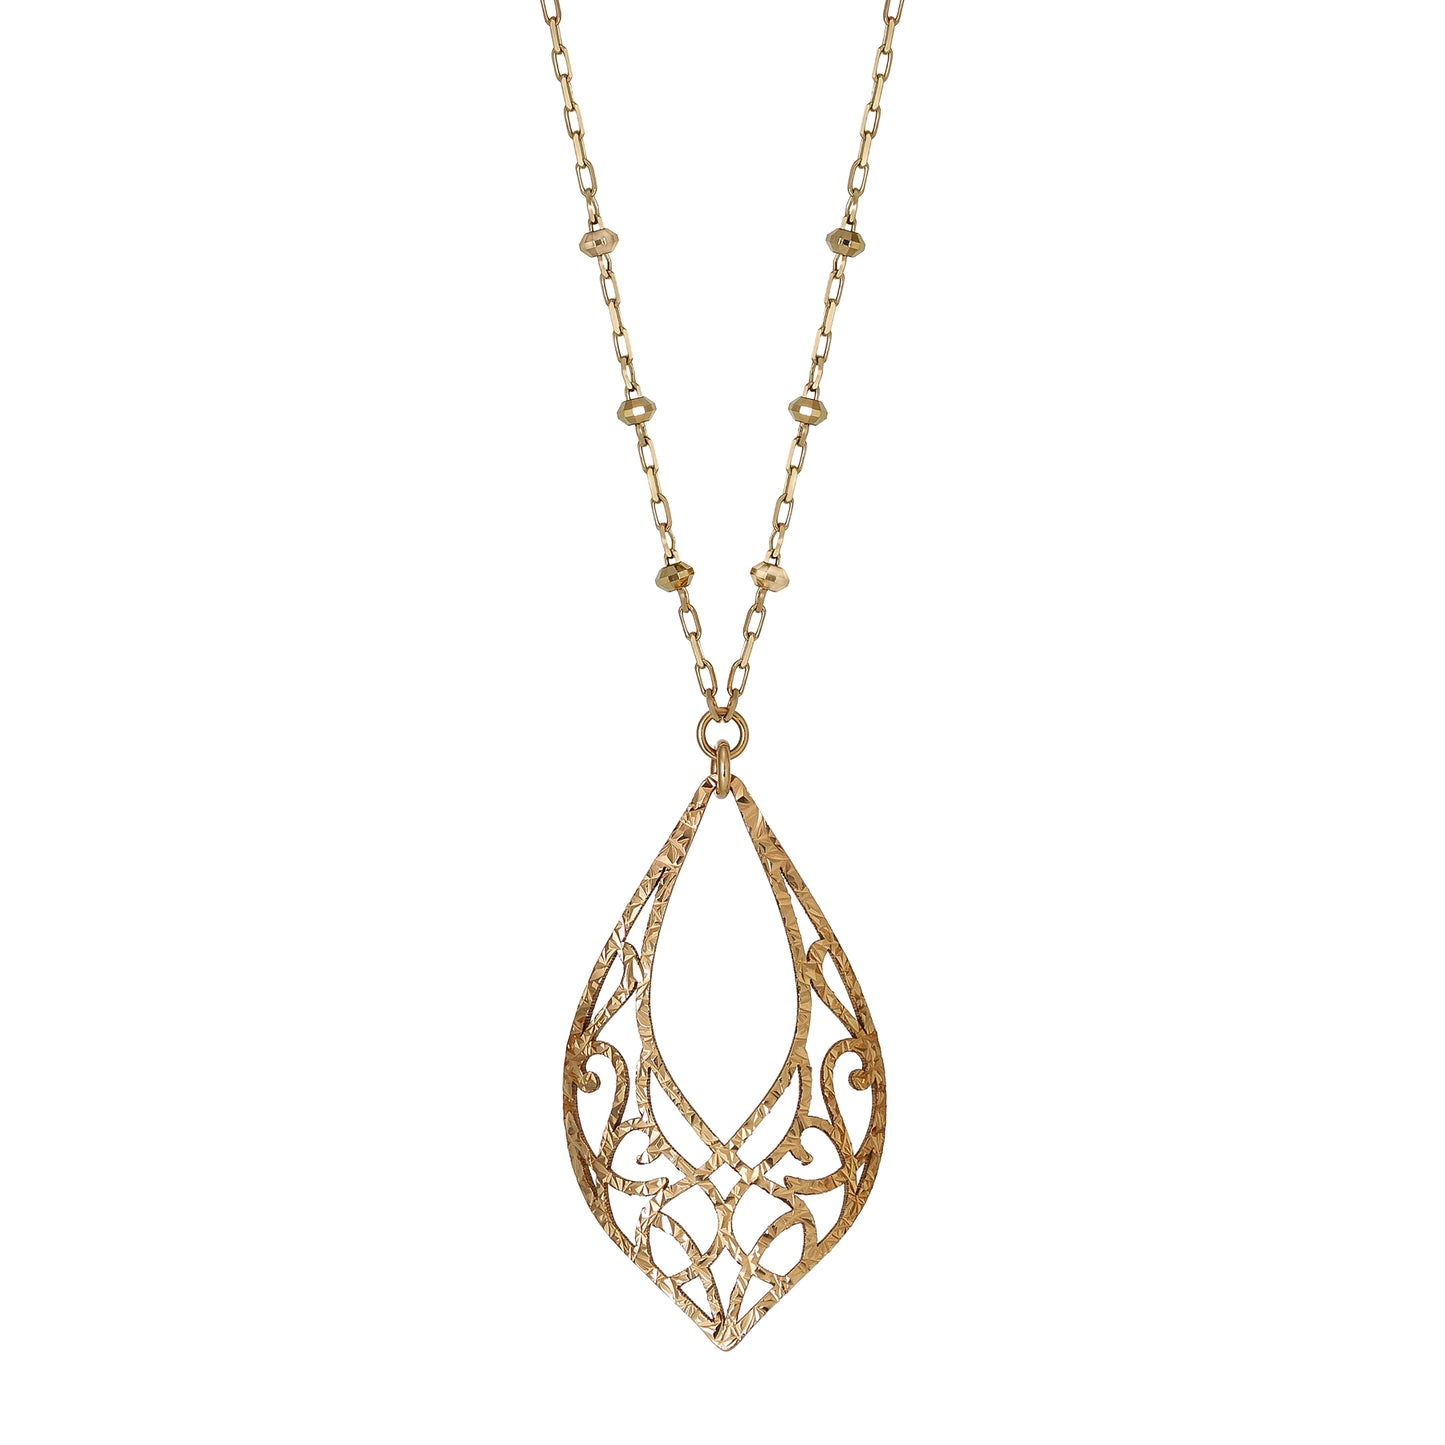 10K Open Work Leaf Design Necklace (Yellow Gold) - Product Image